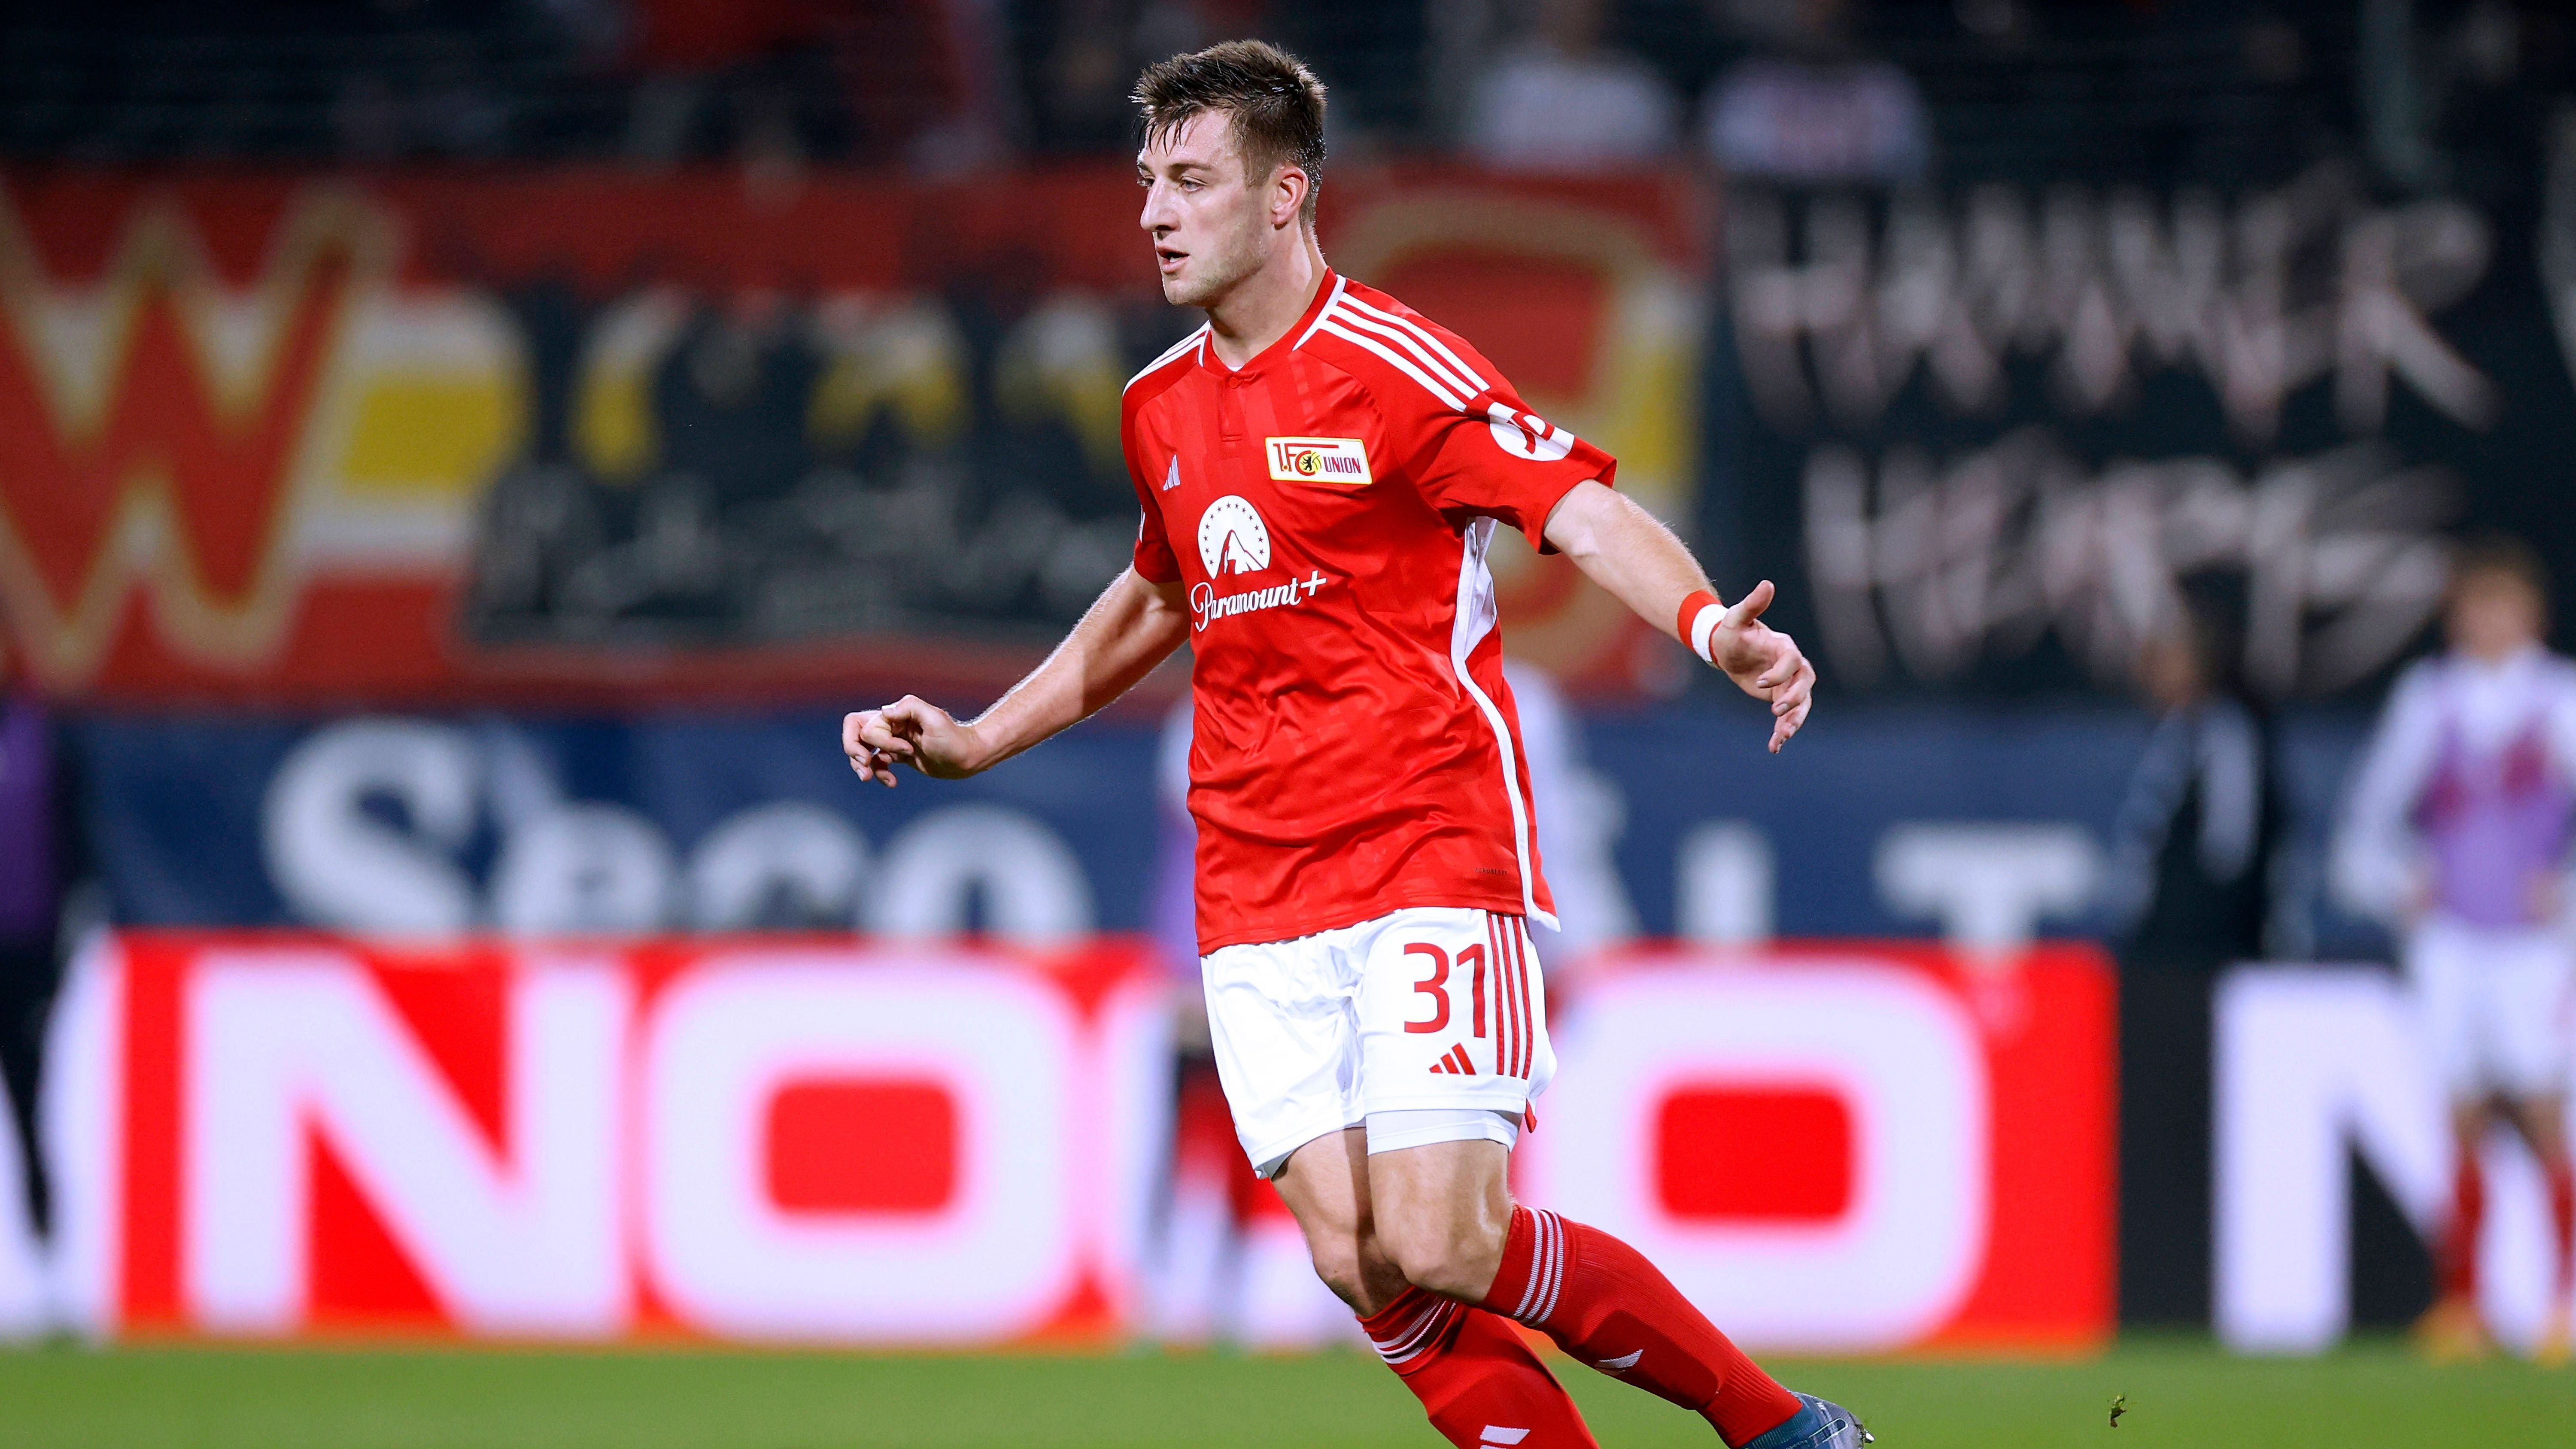 <strong>Robin Knoche (Union Berlin)</strong><br><strong>Position:</strong>&nbsp;Abwehr<br><strong>Nationalität:</strong> Deutschland<br><strong>Alter:</strong>&nbsp;31 Jahre<br><strong>Im Verein seit:</strong>&nbsp;4.8.2020<br><strong>Marktwert:</strong>&nbsp;5 Millionen Euro